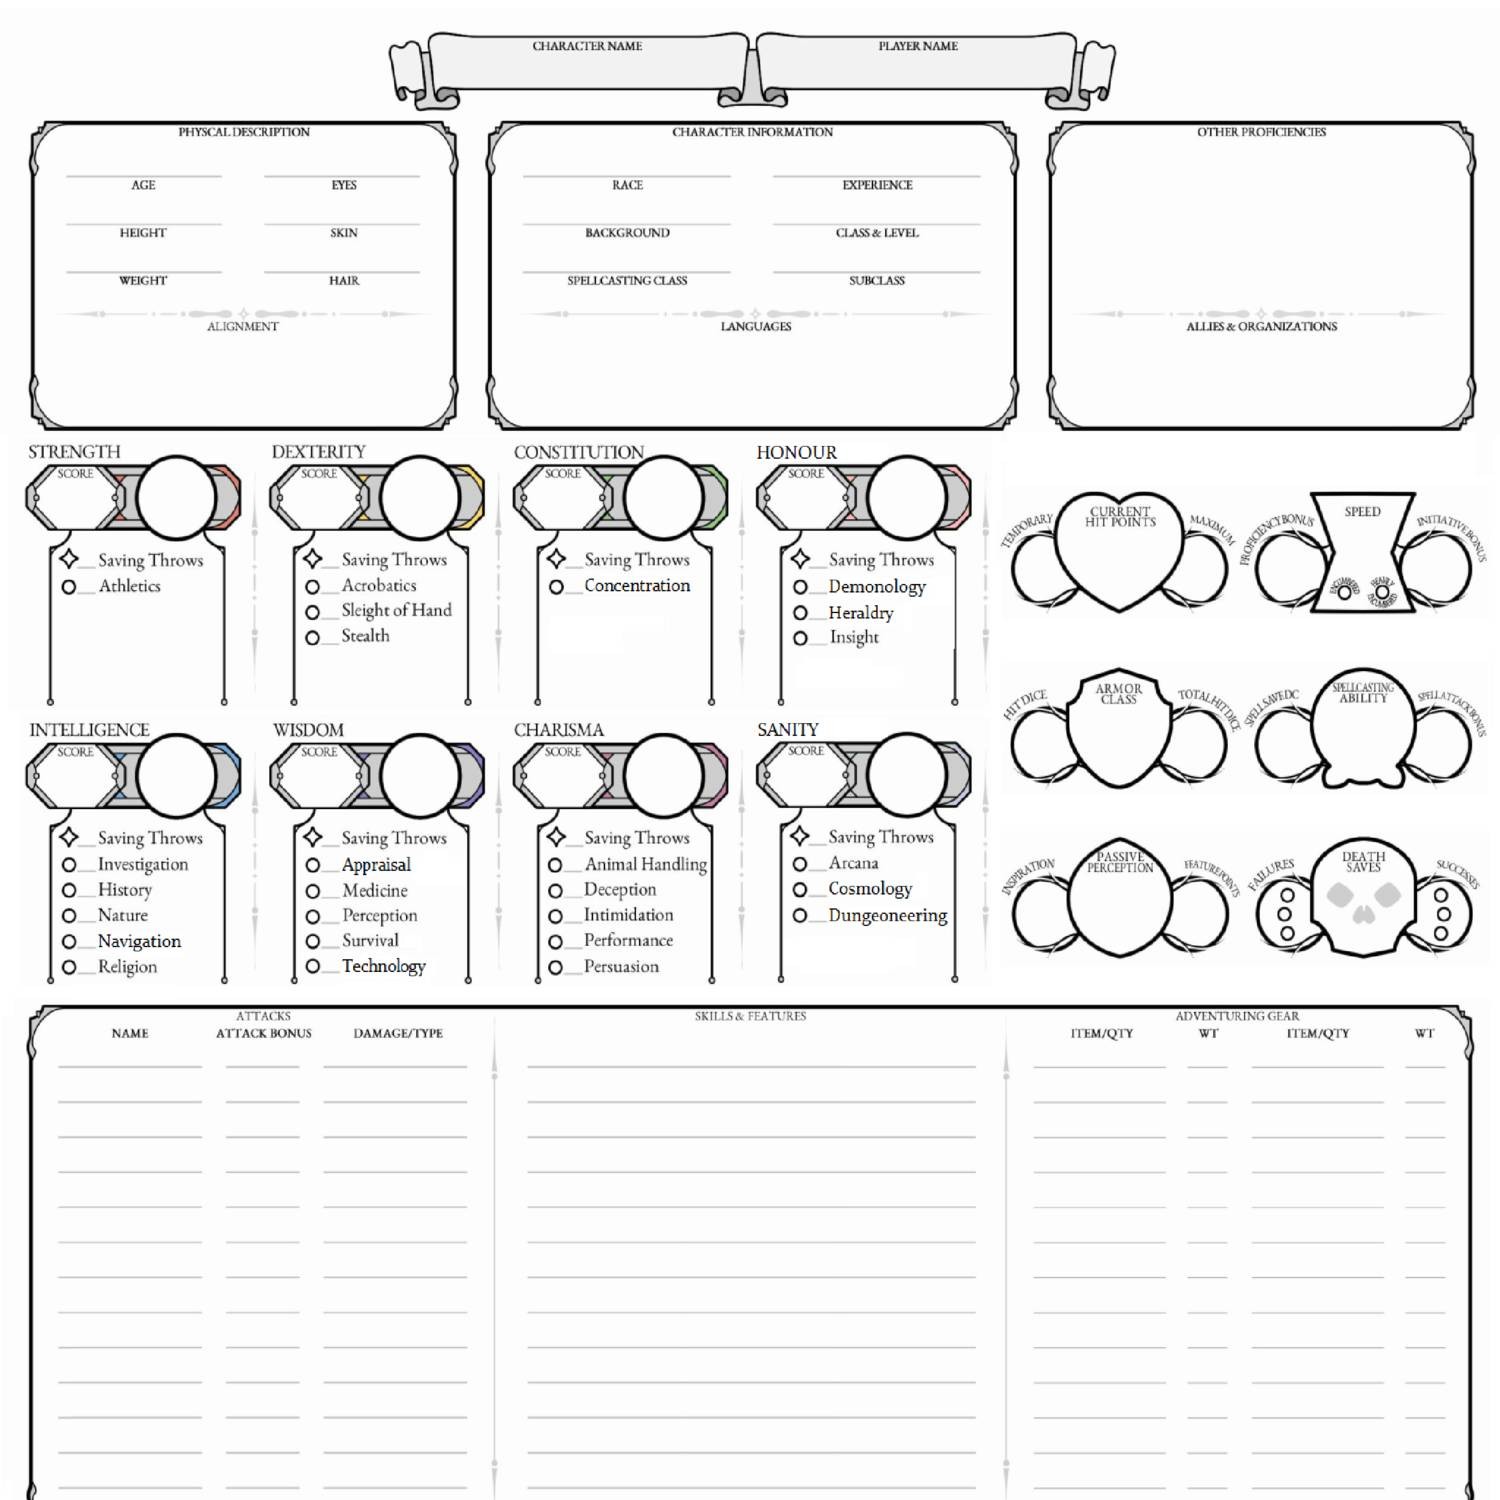 character sheet.pdf DocDroid